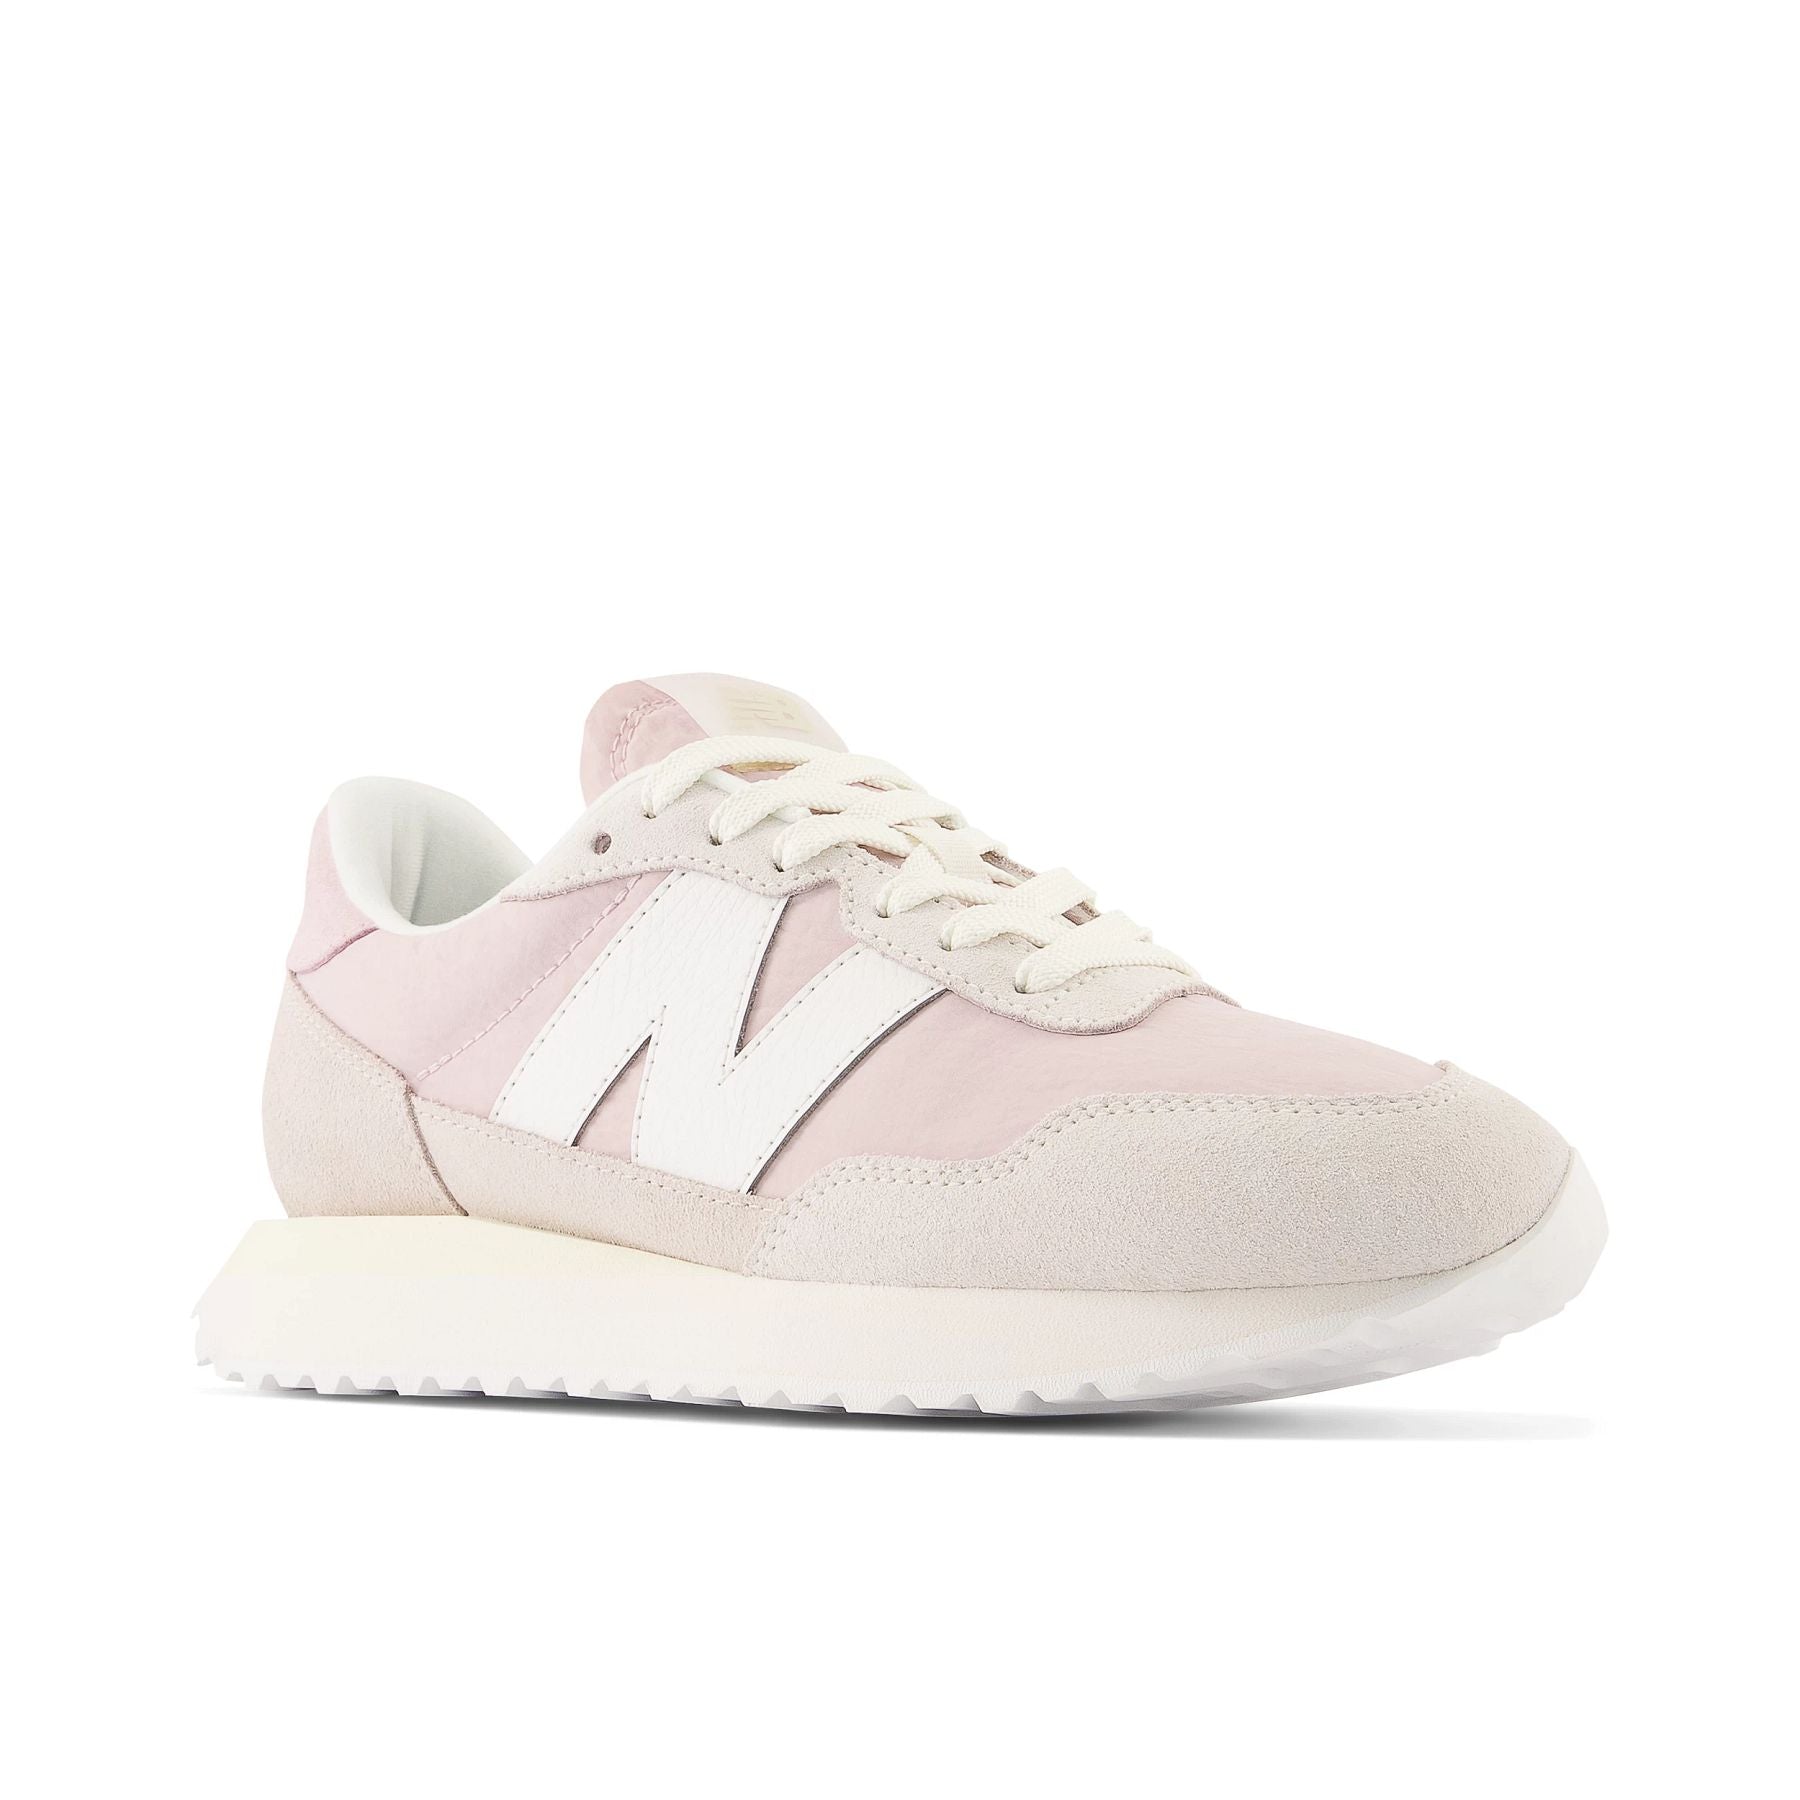 Front angle view of the Women's New Balance lifestyle 237 shoe in white